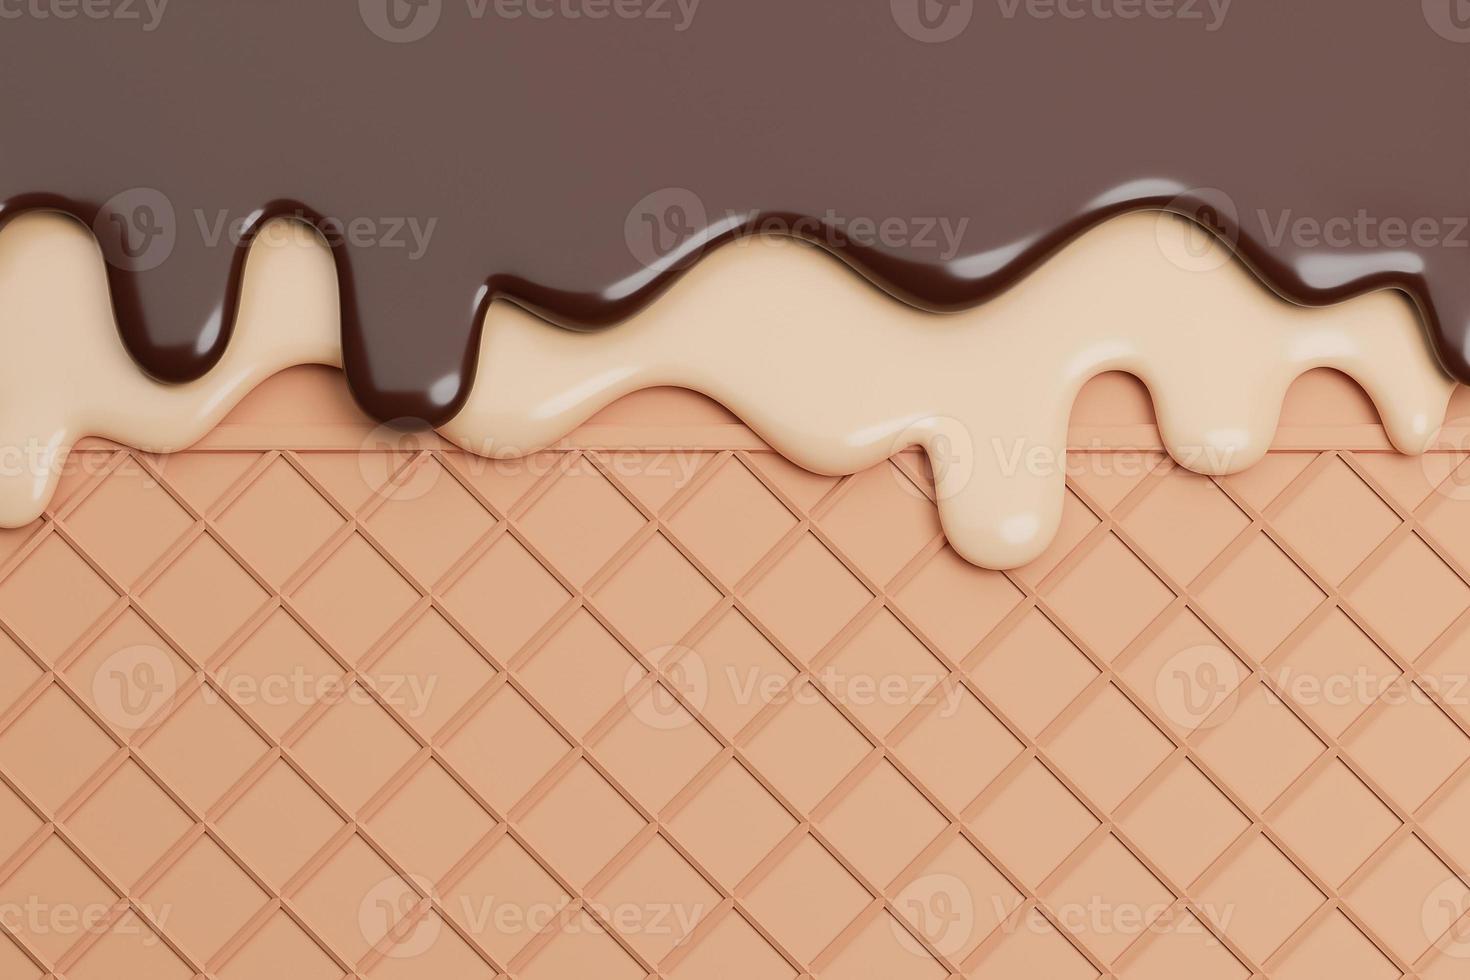 Chocolate and Vanilla Ice Cream Melted on Wafer Background.,3d model and illustration. photo